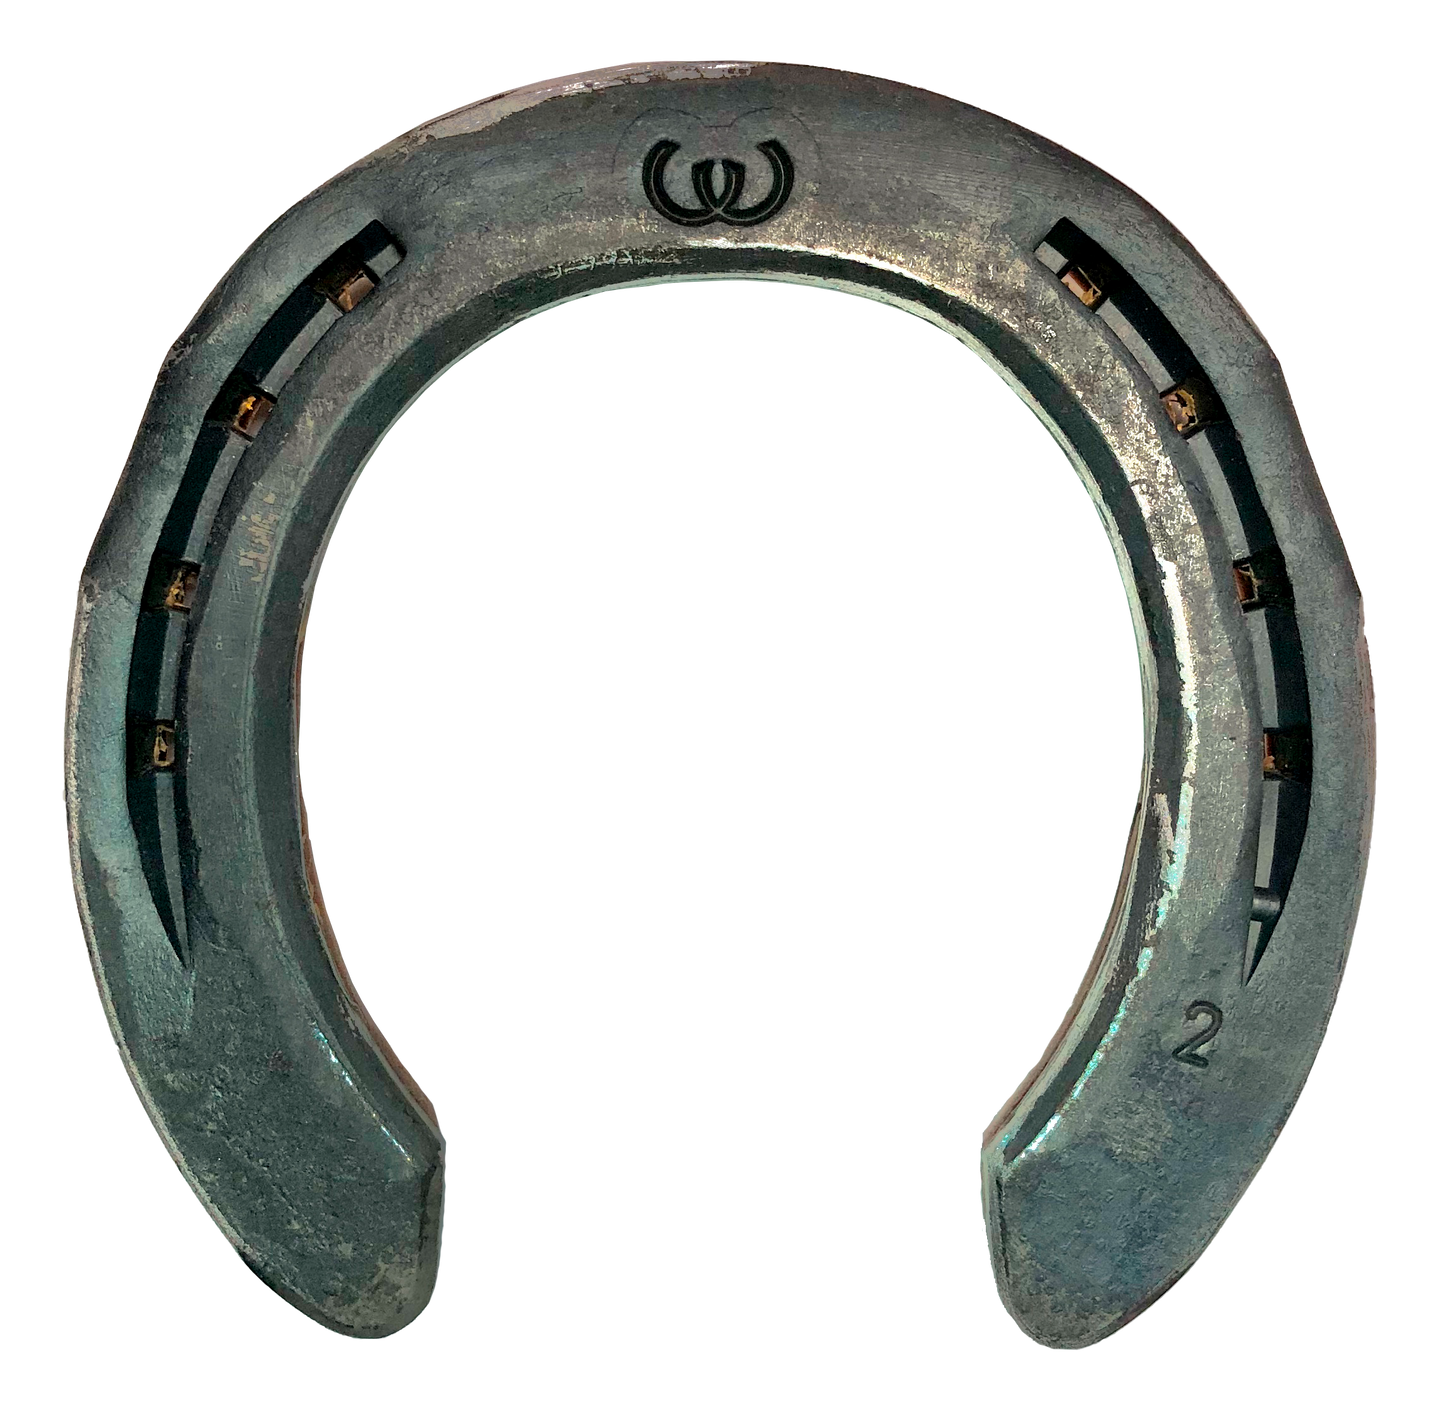 Front shock absorbing horseshoes with 2 clips